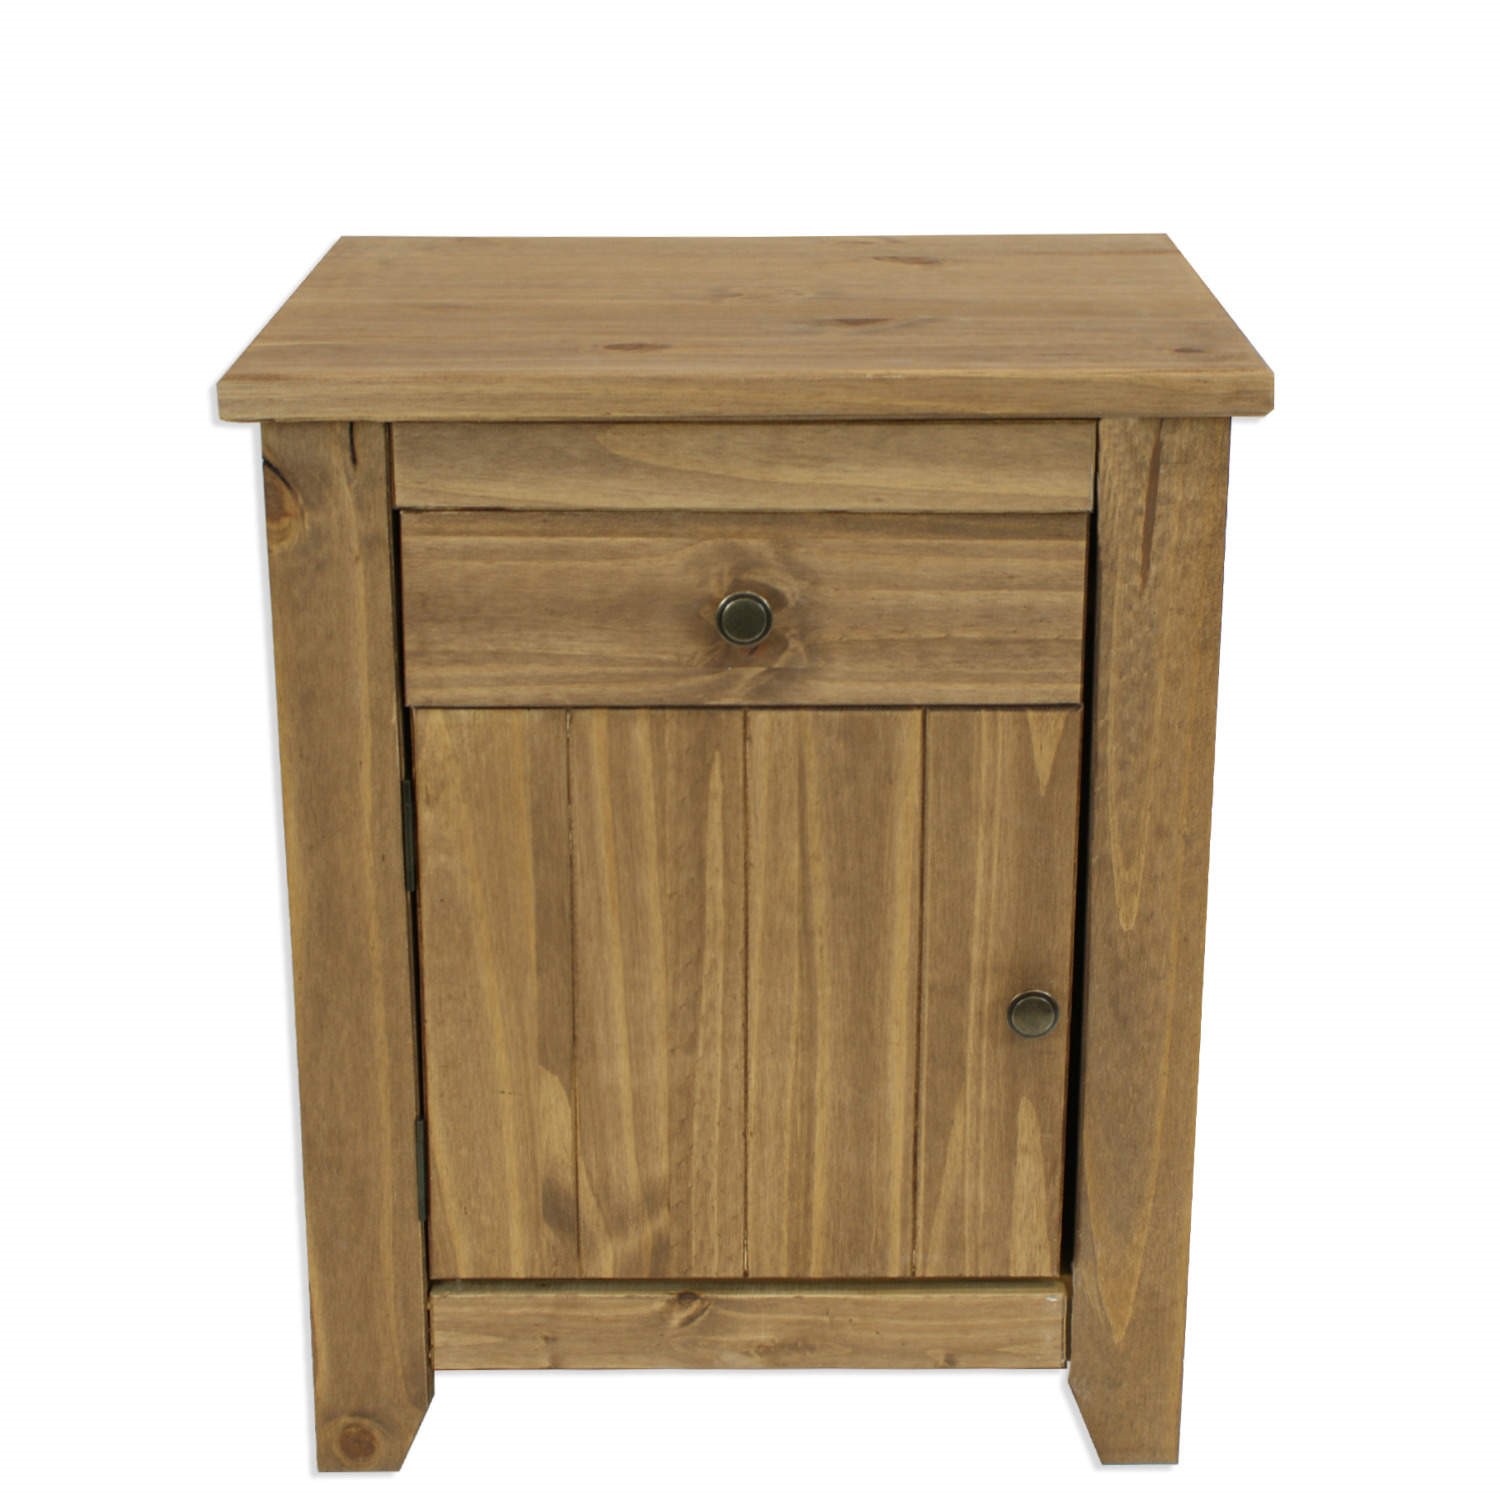 Read more about Solid pine bedside table with drawer and cupboard havana lpd